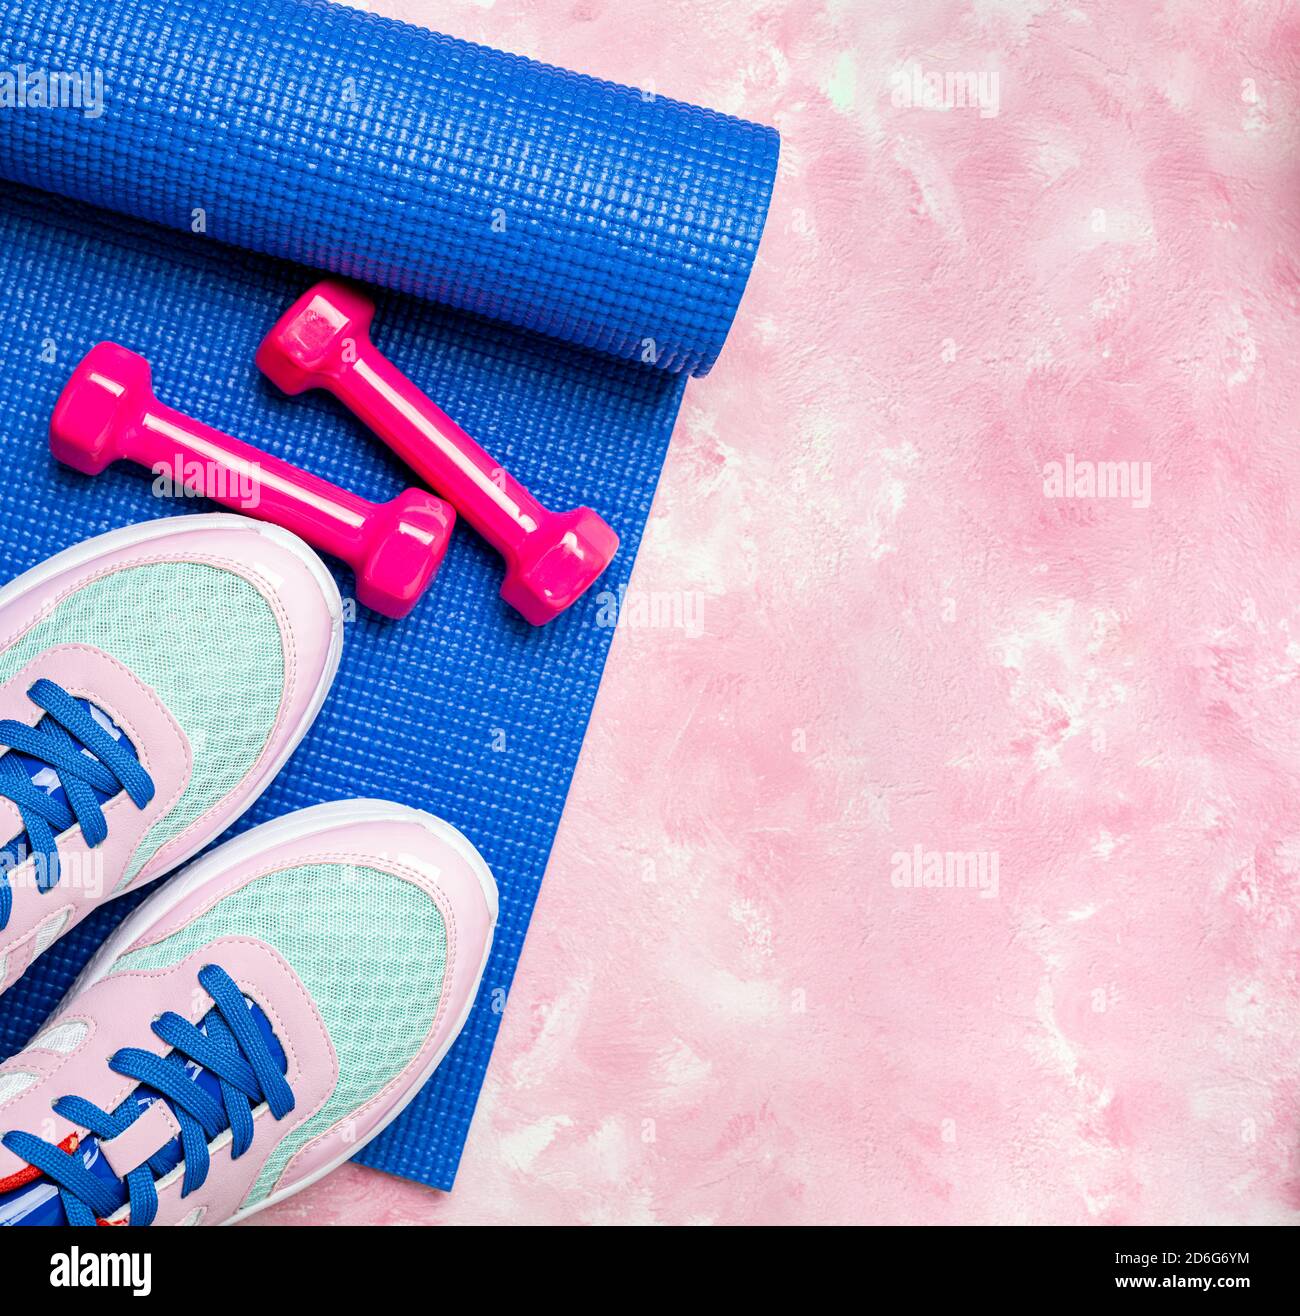 Blue yoga mat, sport shoes, dumbbells on pink background. Concept healthy lifestyle, sport life, sport and diet. Sport equipment. Copy space, top view Stock Photo